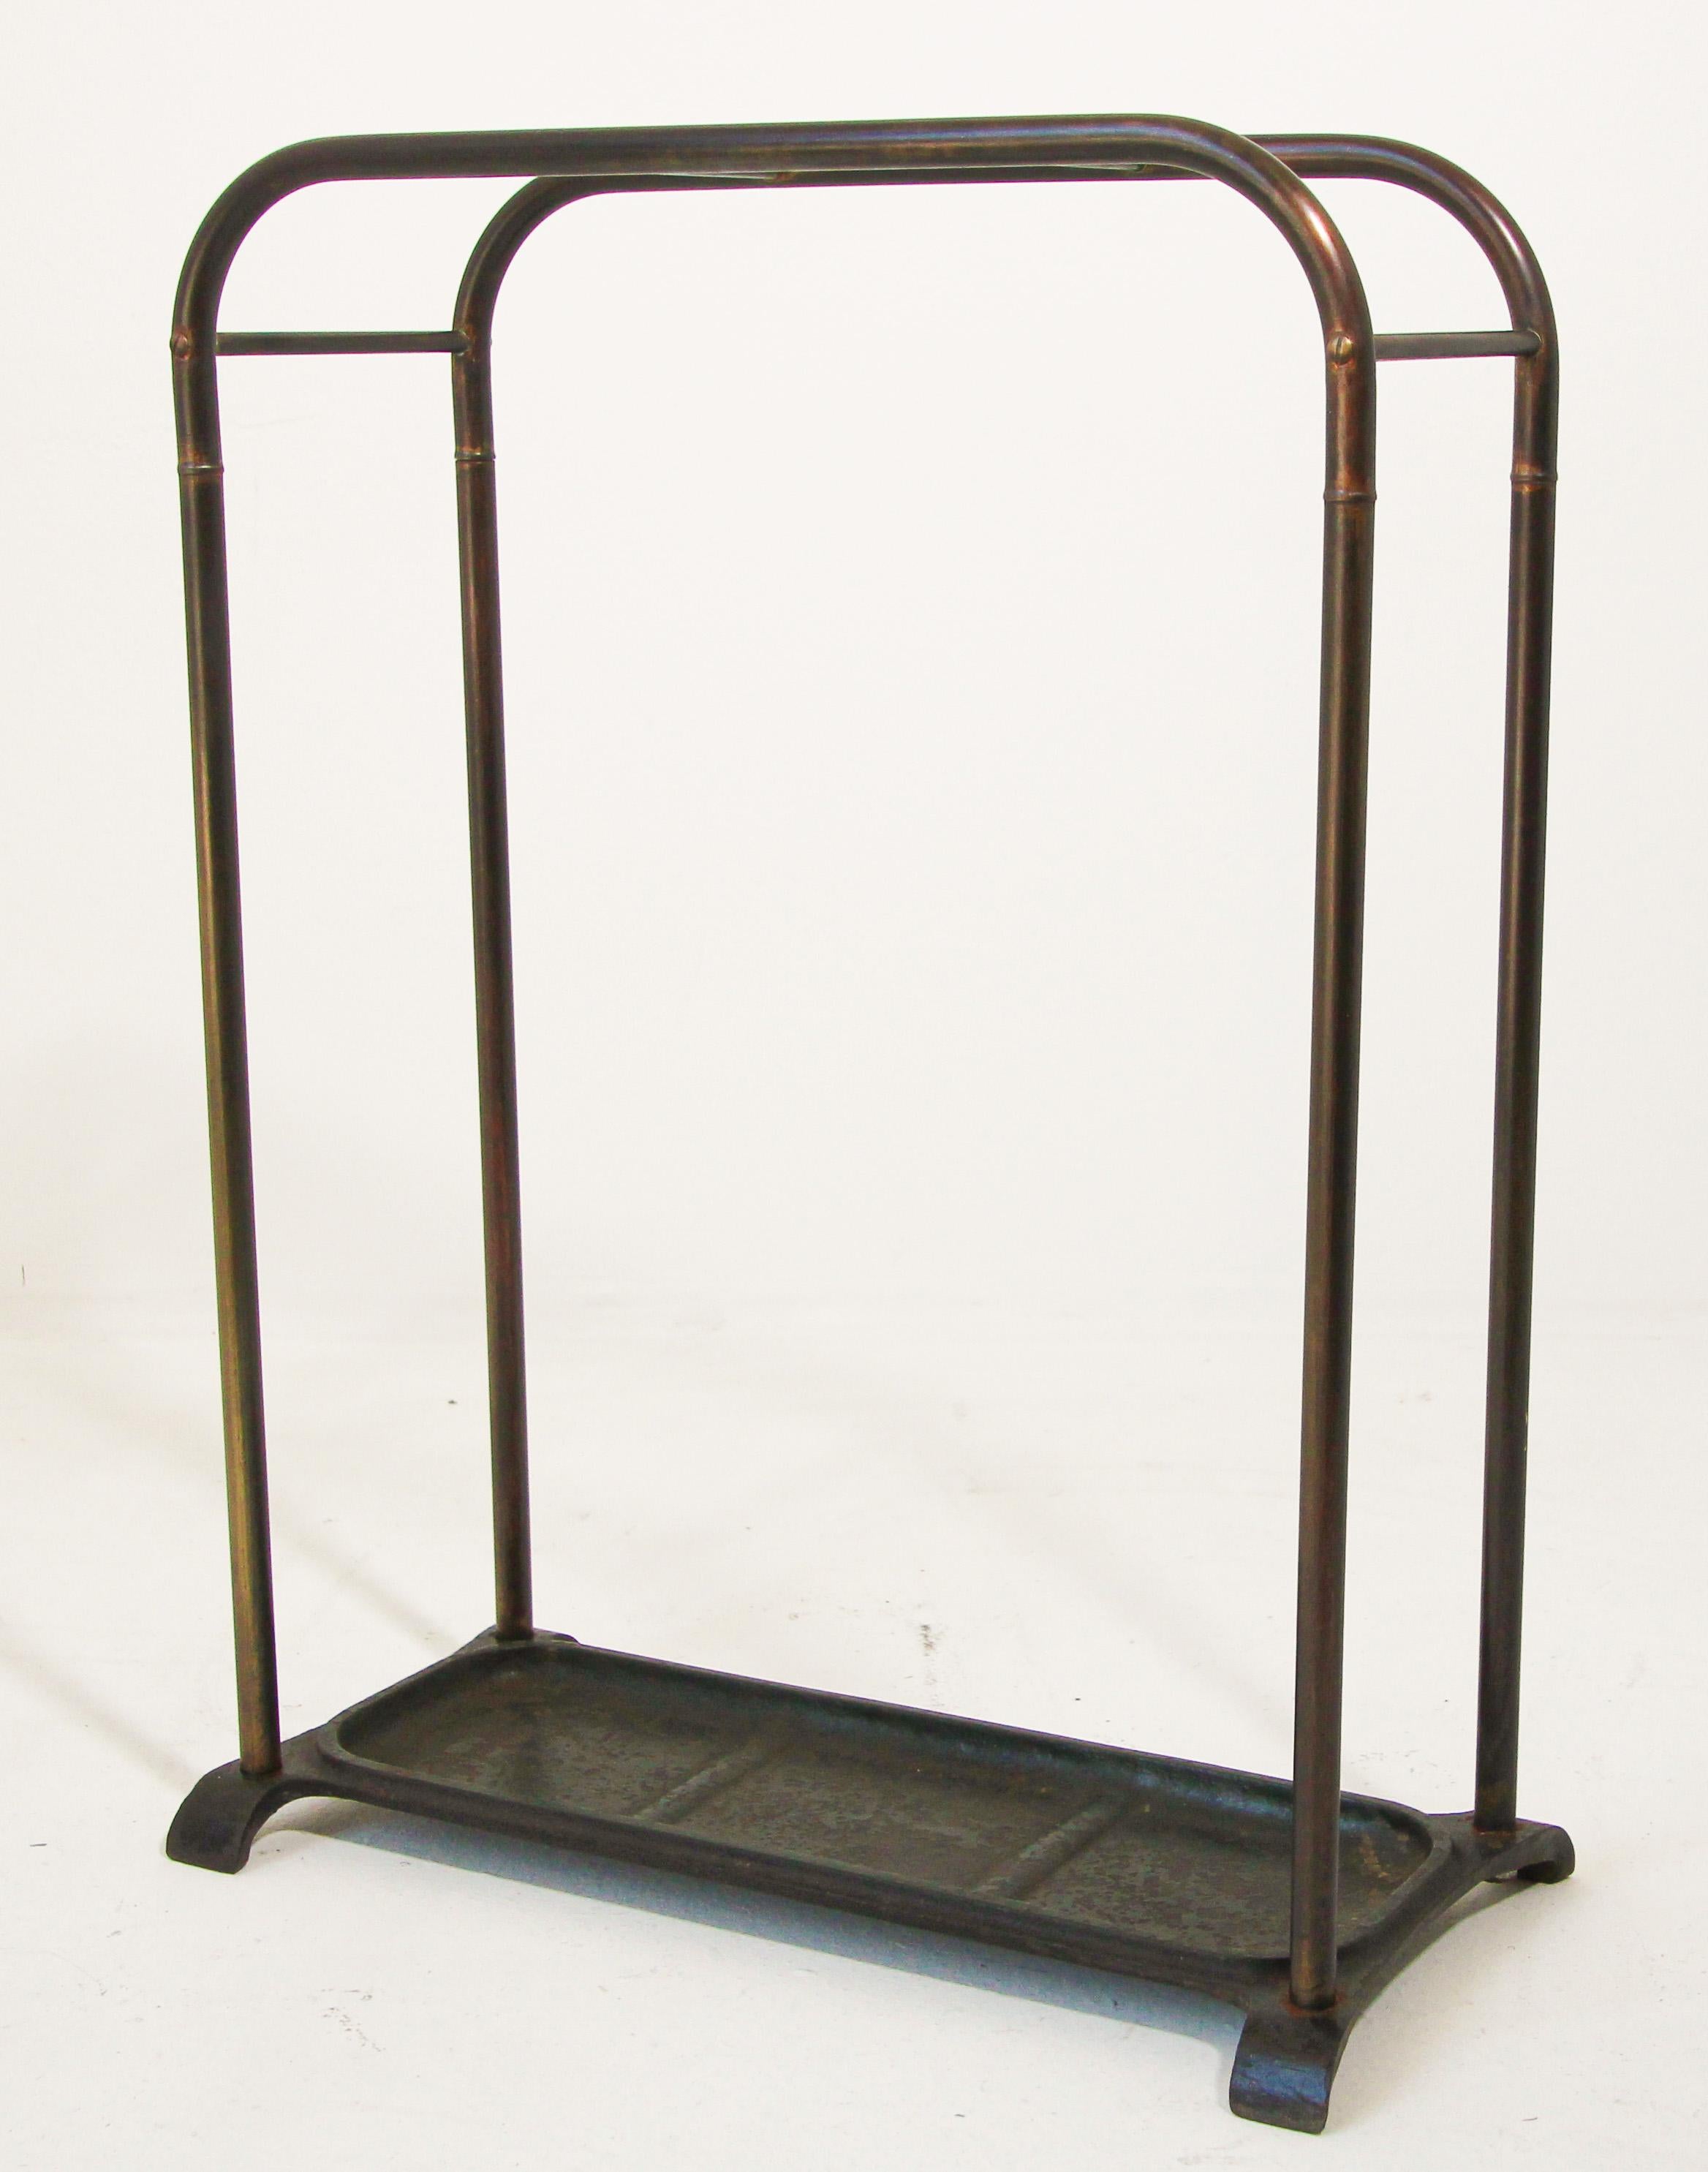 Victorian 19th century brass umbrella stand or stick stand.
Antique brass top divided into three sections to hold either walking sticks or umbrellas.
Umbrella brass valet rack with 3 sections and hunter green iron tray and supported upon a tubular